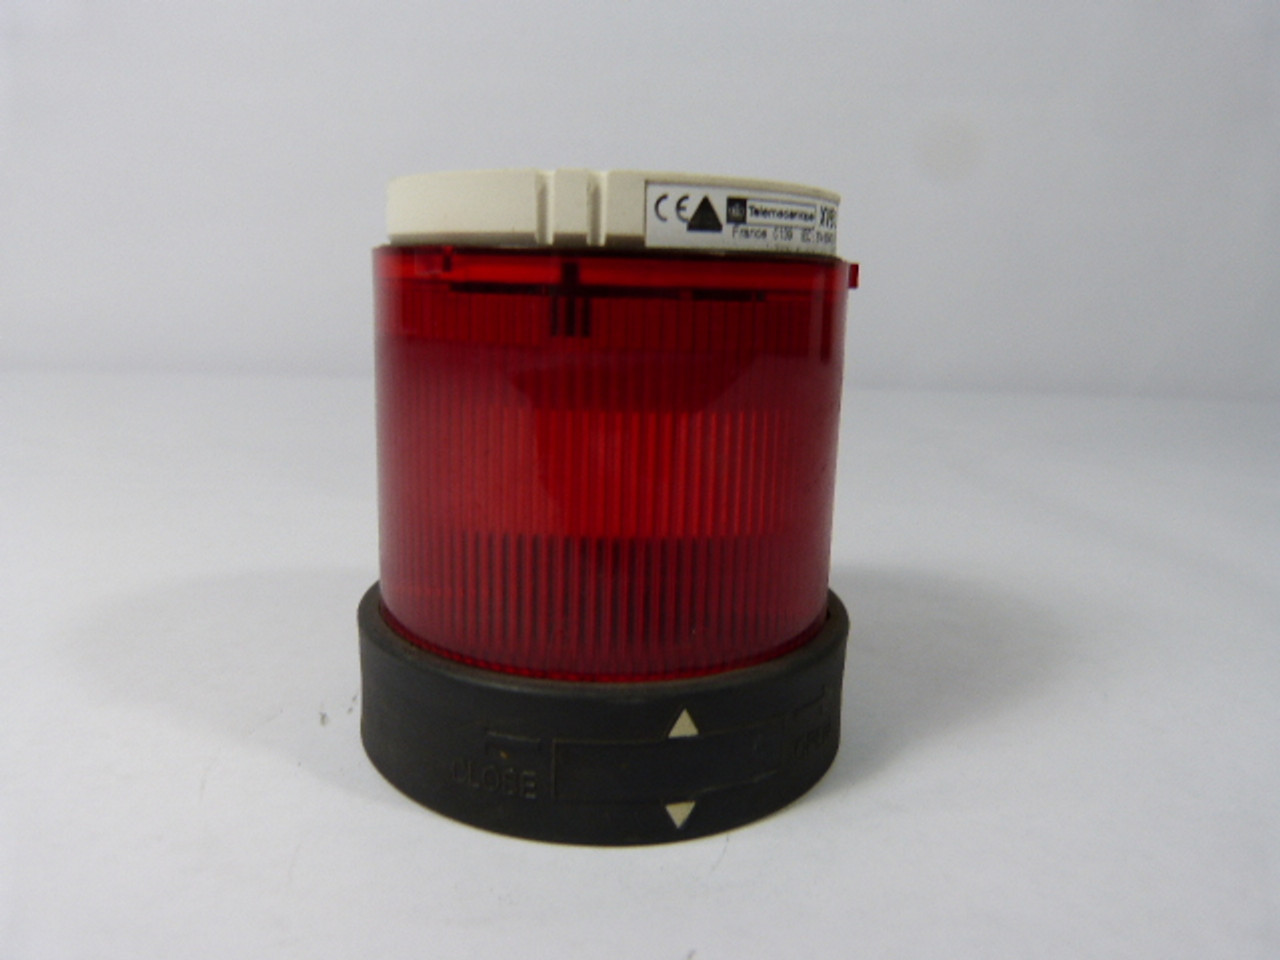 Telemecanique XVB-C34 Red Stack Light *No Bulb* USED